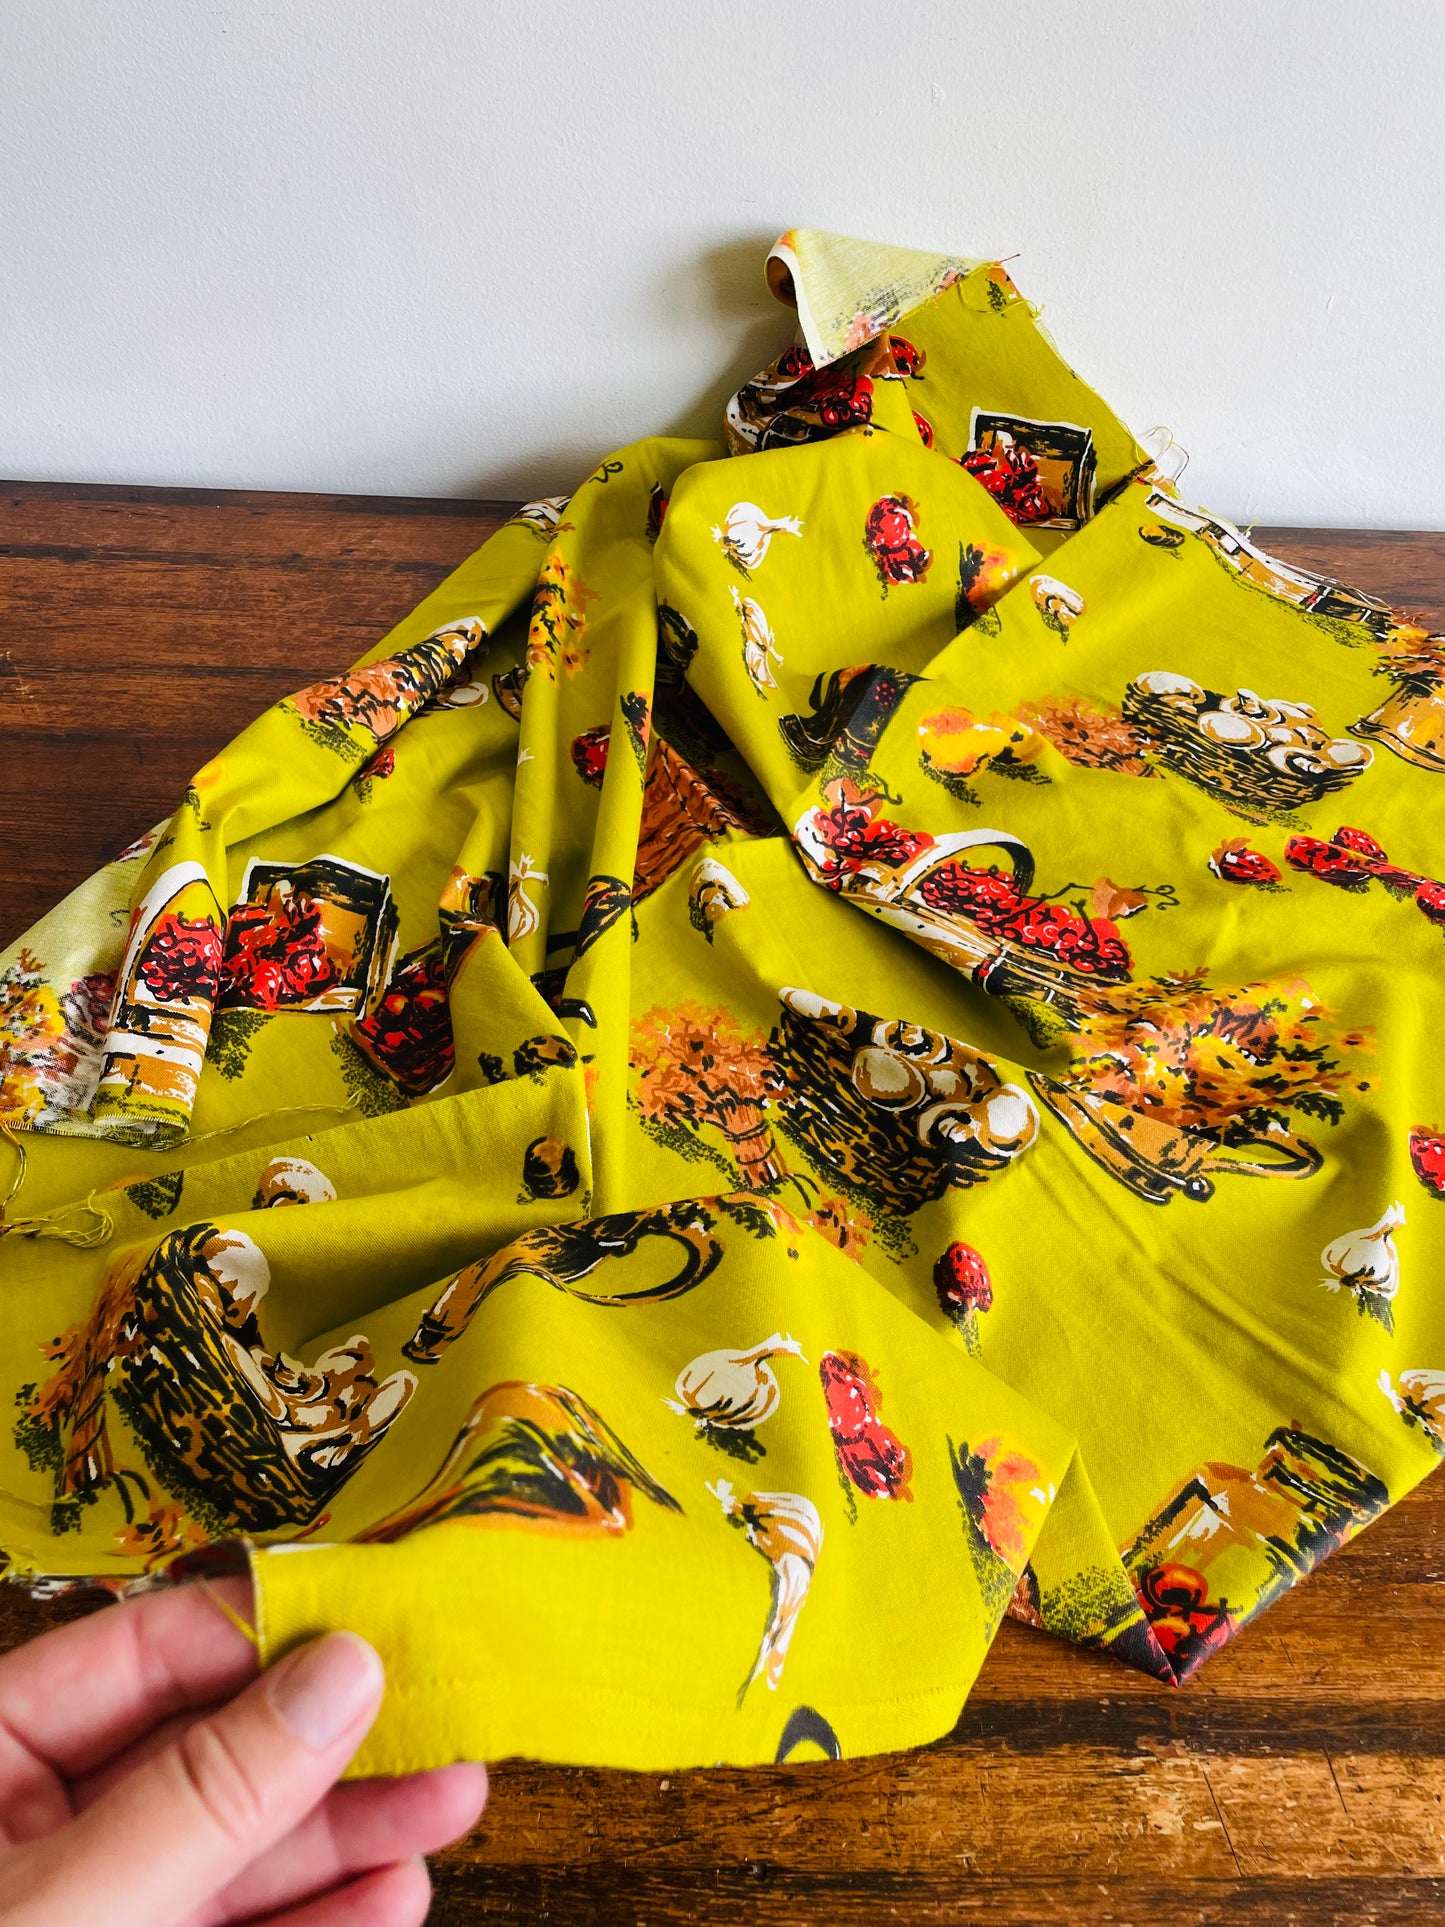 Bright Chartreuse Coloured Fabric with Fun Vegetable, Fruit, & Flower Harvest Design